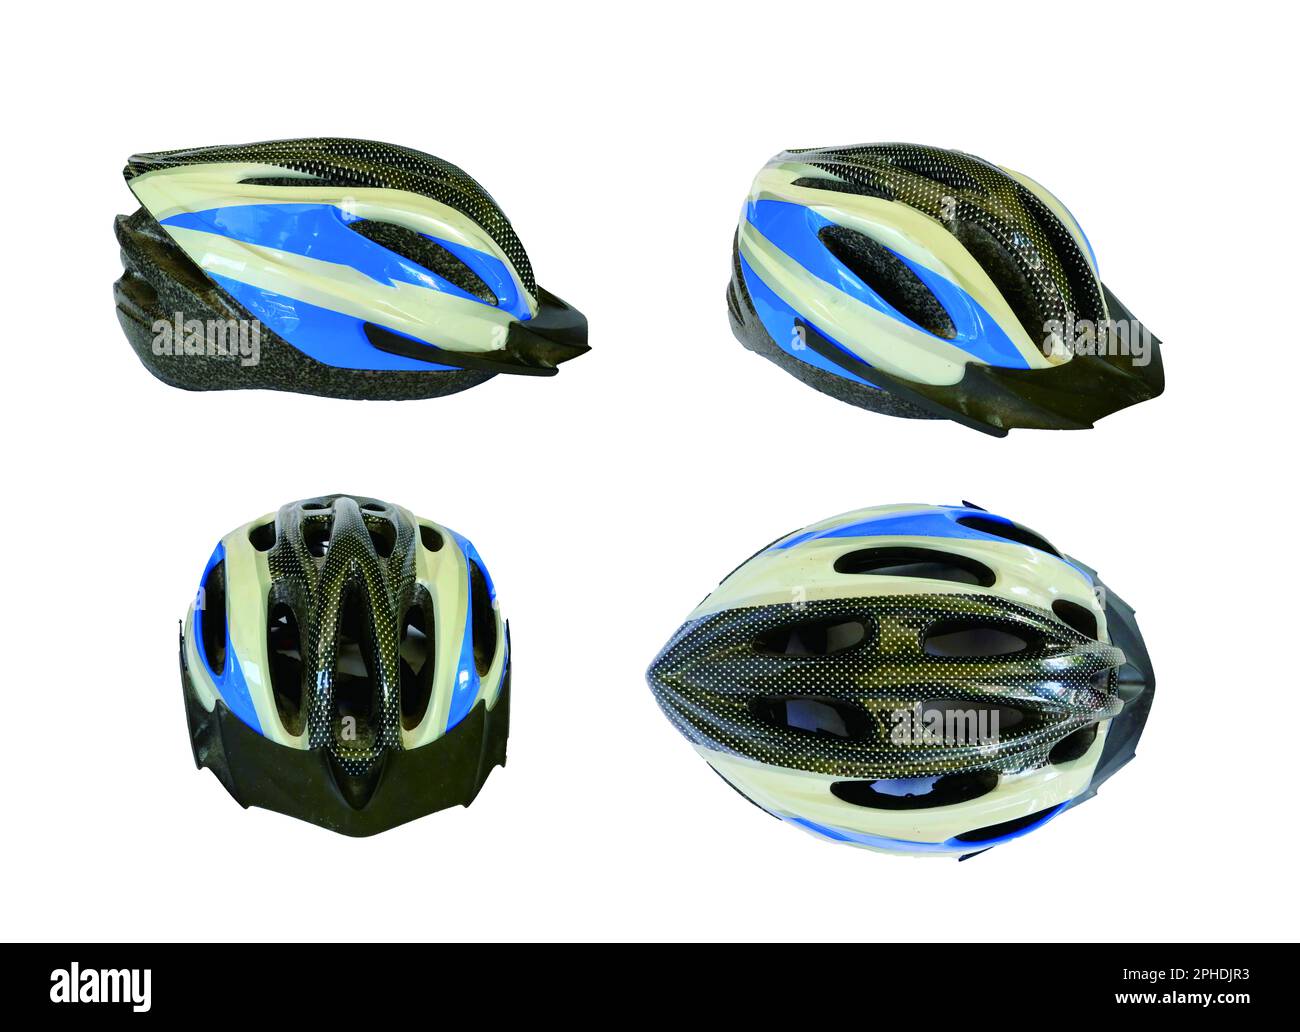 bicycle helmet. blue bicycle helmet isolated on white background. Perspective view of bicycle helmet Stock Photo